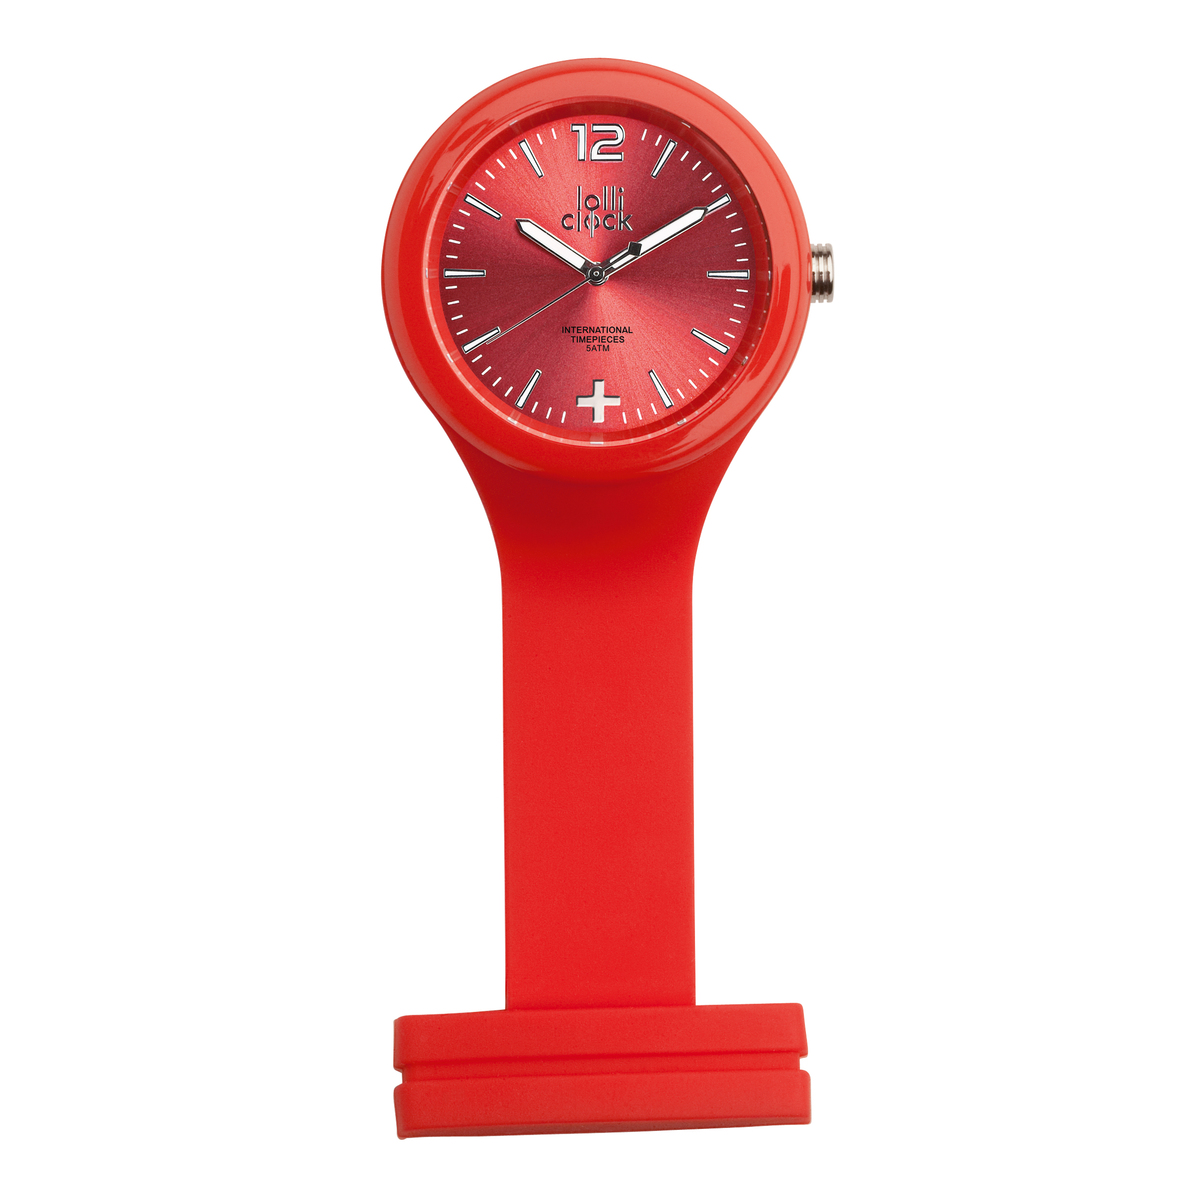 LM Uhr LOLLICLOCK-CARE RED rot